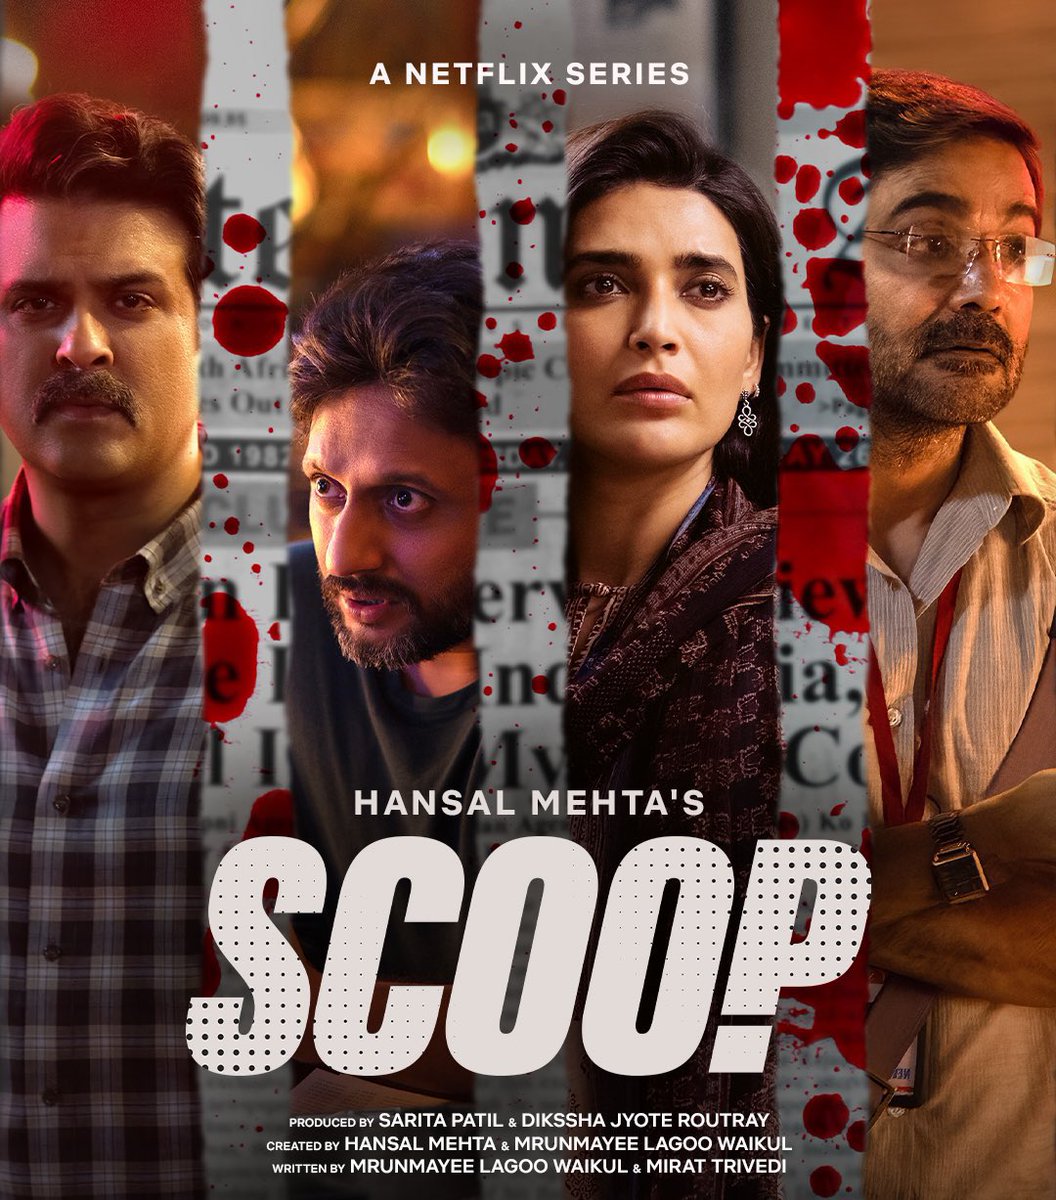 Binge watched #SCOOP. It was one of finest series I've seen recently. It was gripping and intriguing. Solidarity with all the bold journalists who sacrifice their lives to bringing out the truths. Fantastic Performance from @KARISHMAK_TANNA. Hats off @mehtahansal and team.